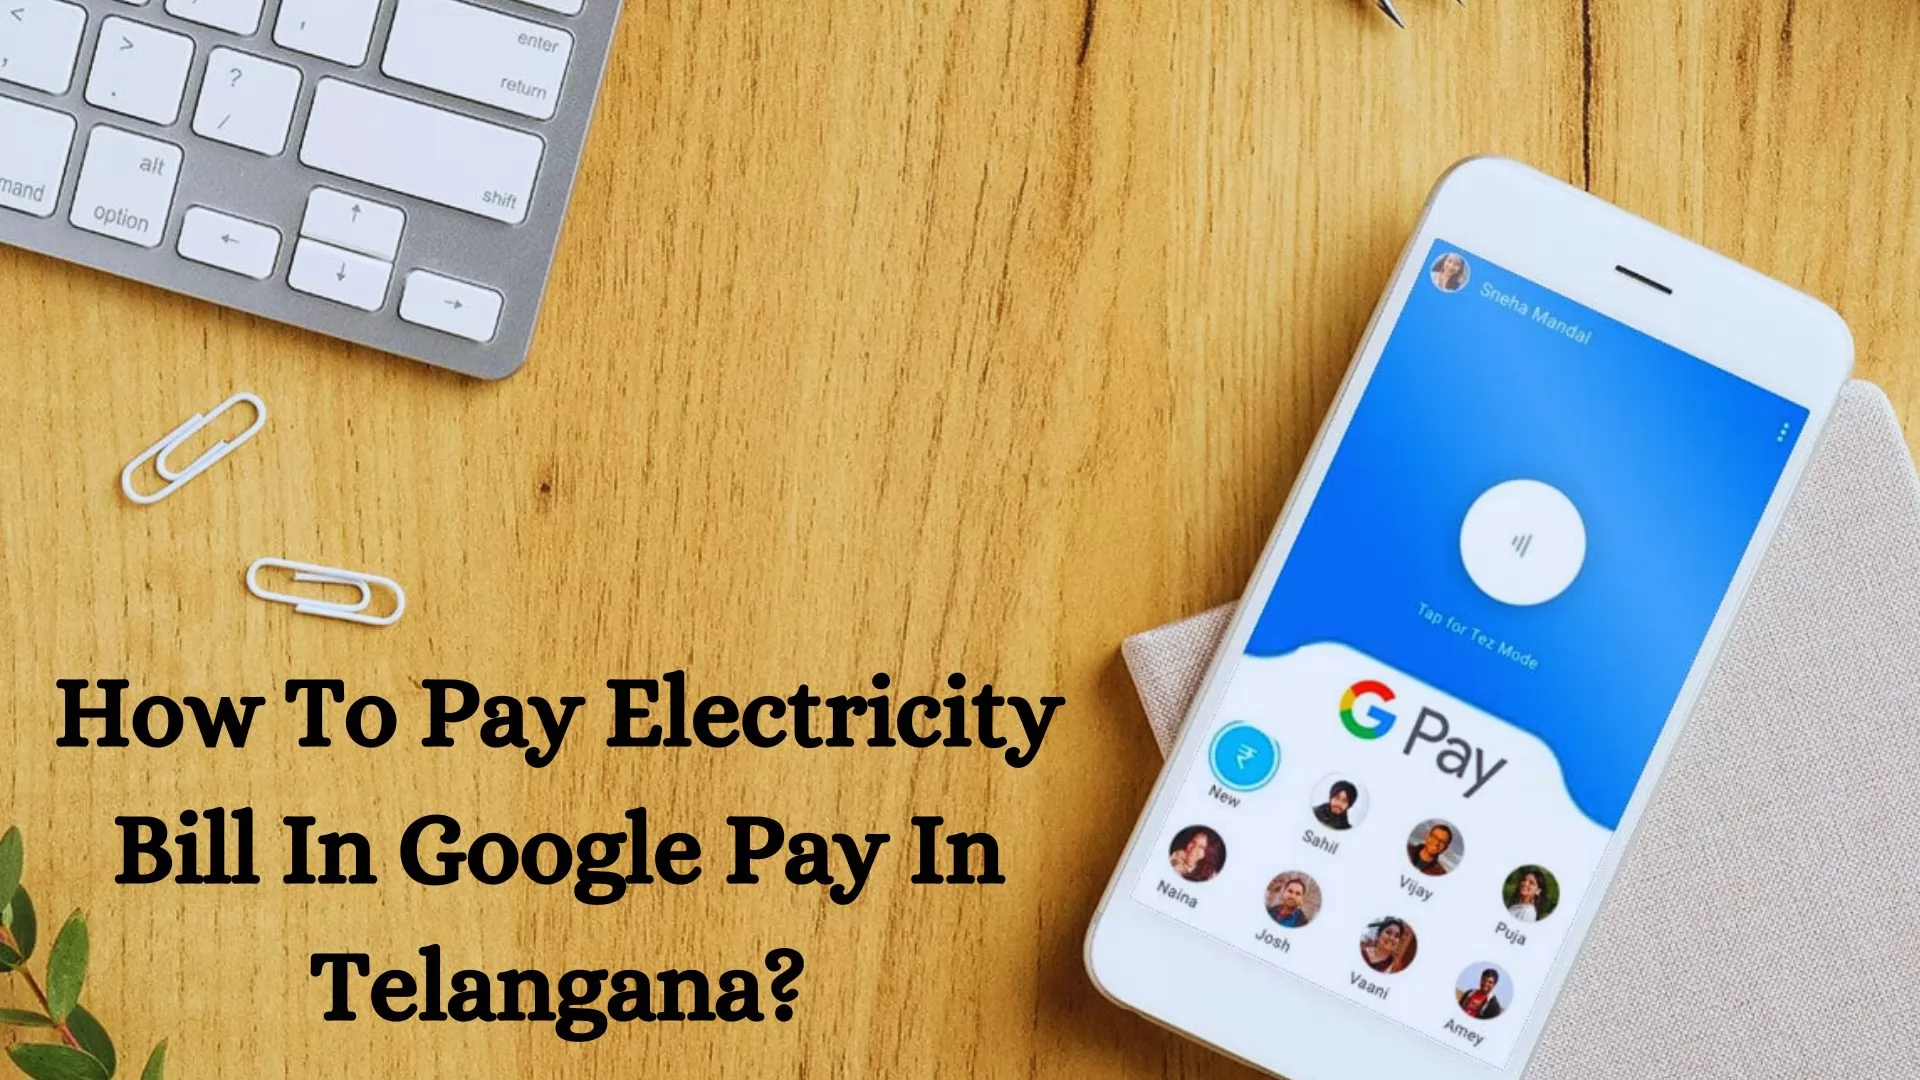 How To Pay Electricity Bill In Google Pay In Telangana